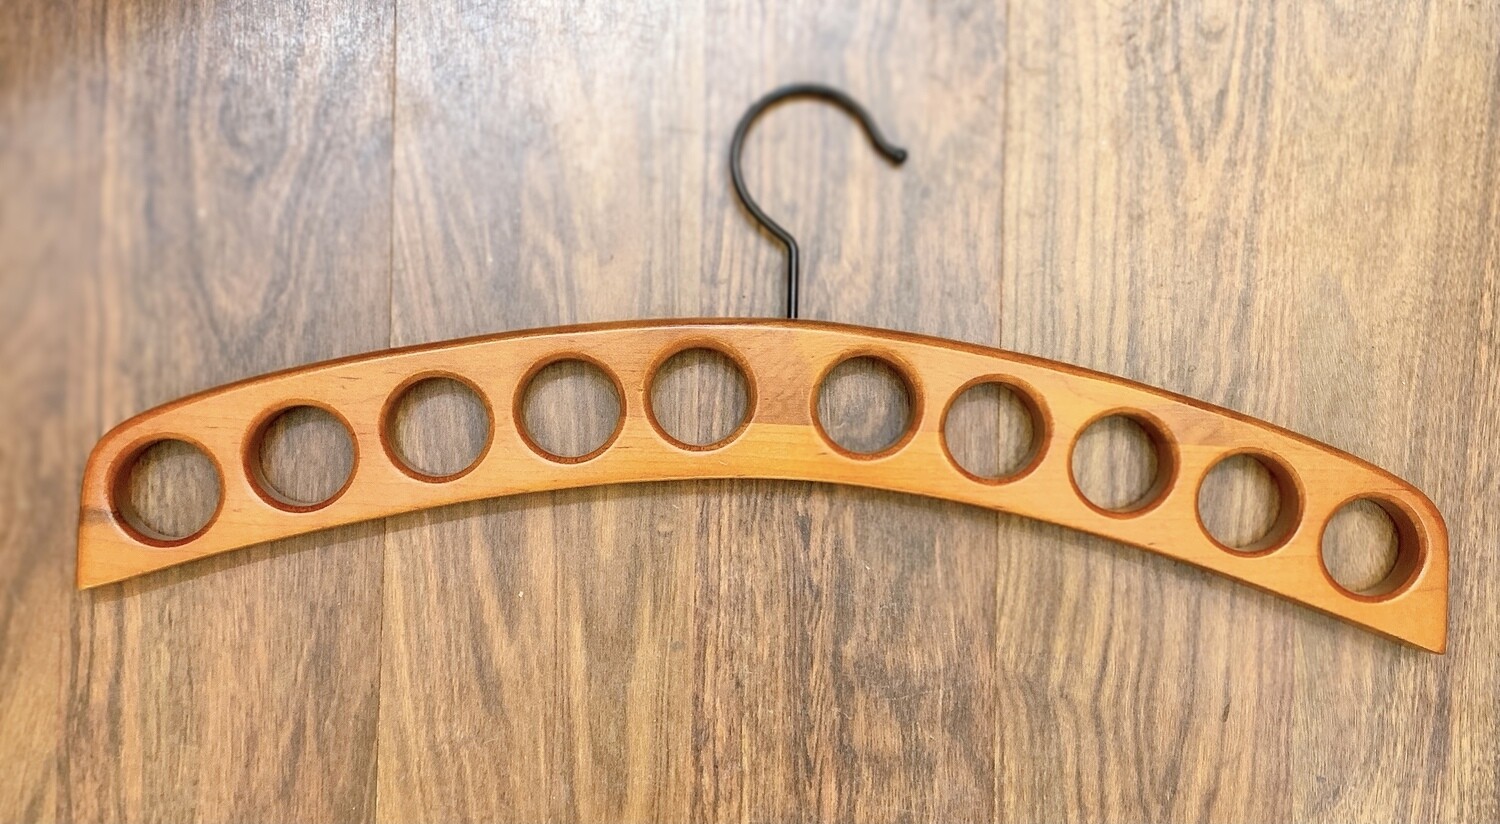  Wood Scarf Hanger with 10 Holes